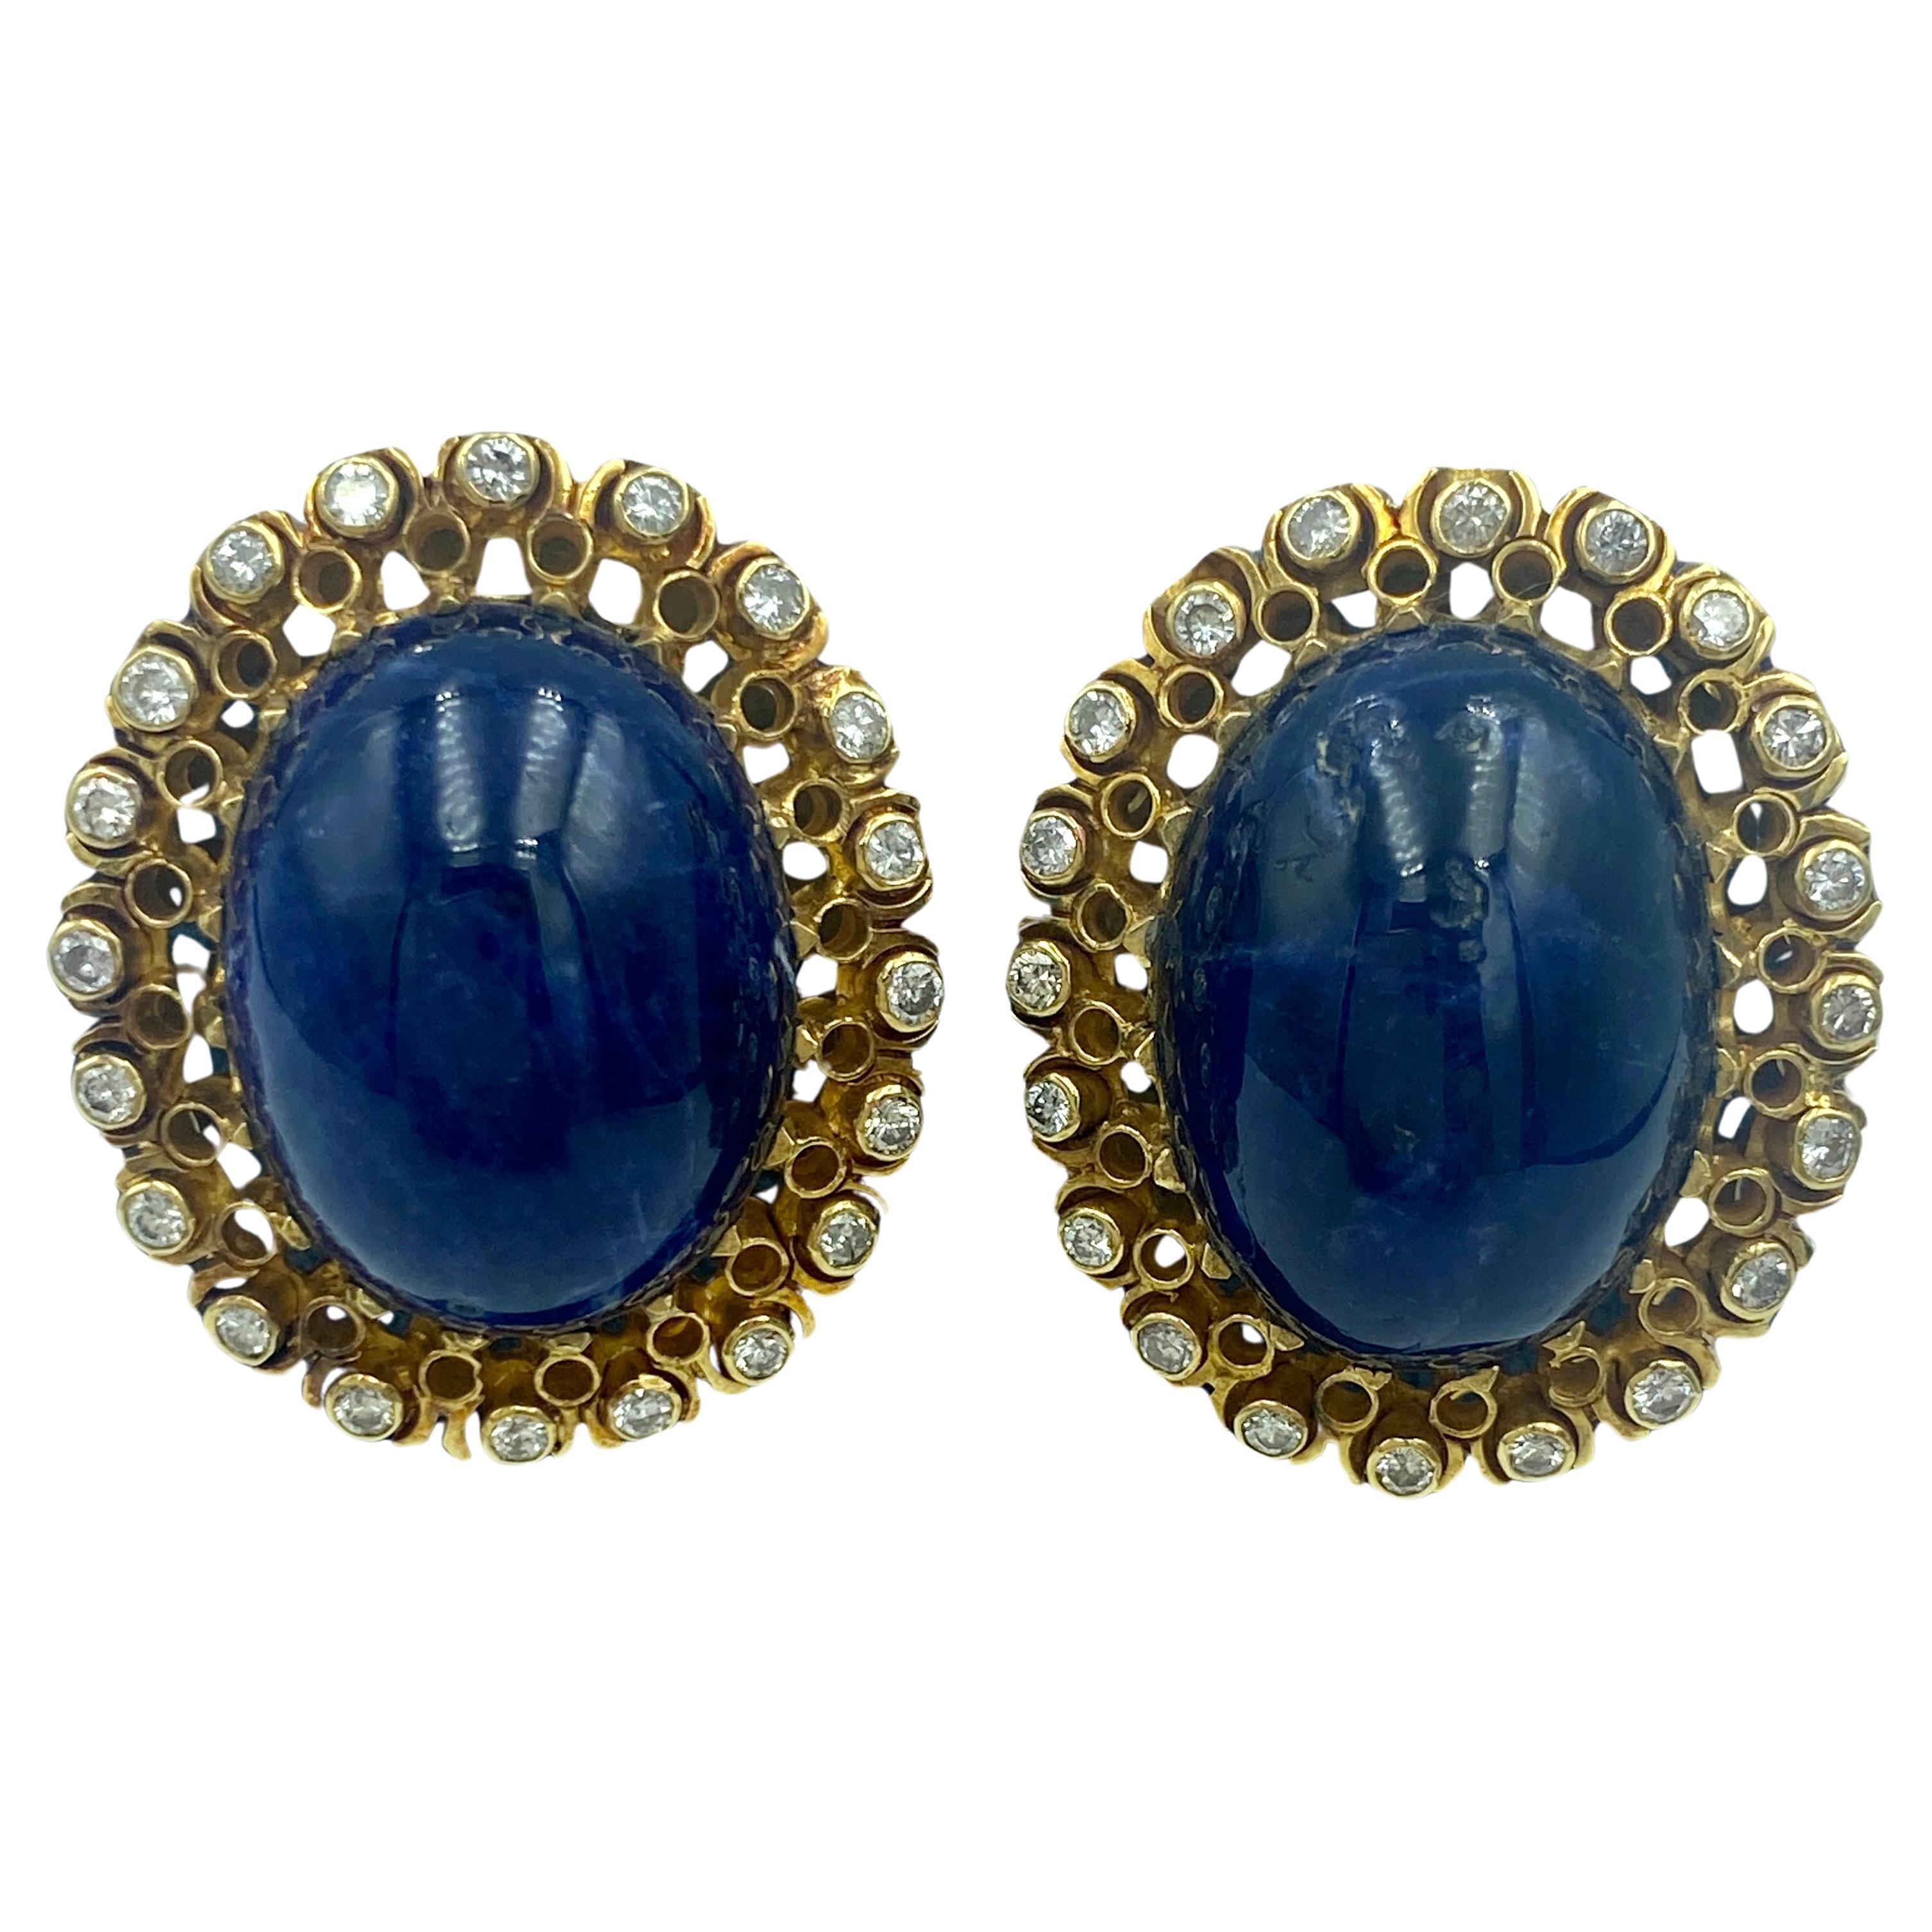 Lalaounis 18k gold cabochon lapis and diamond earrings